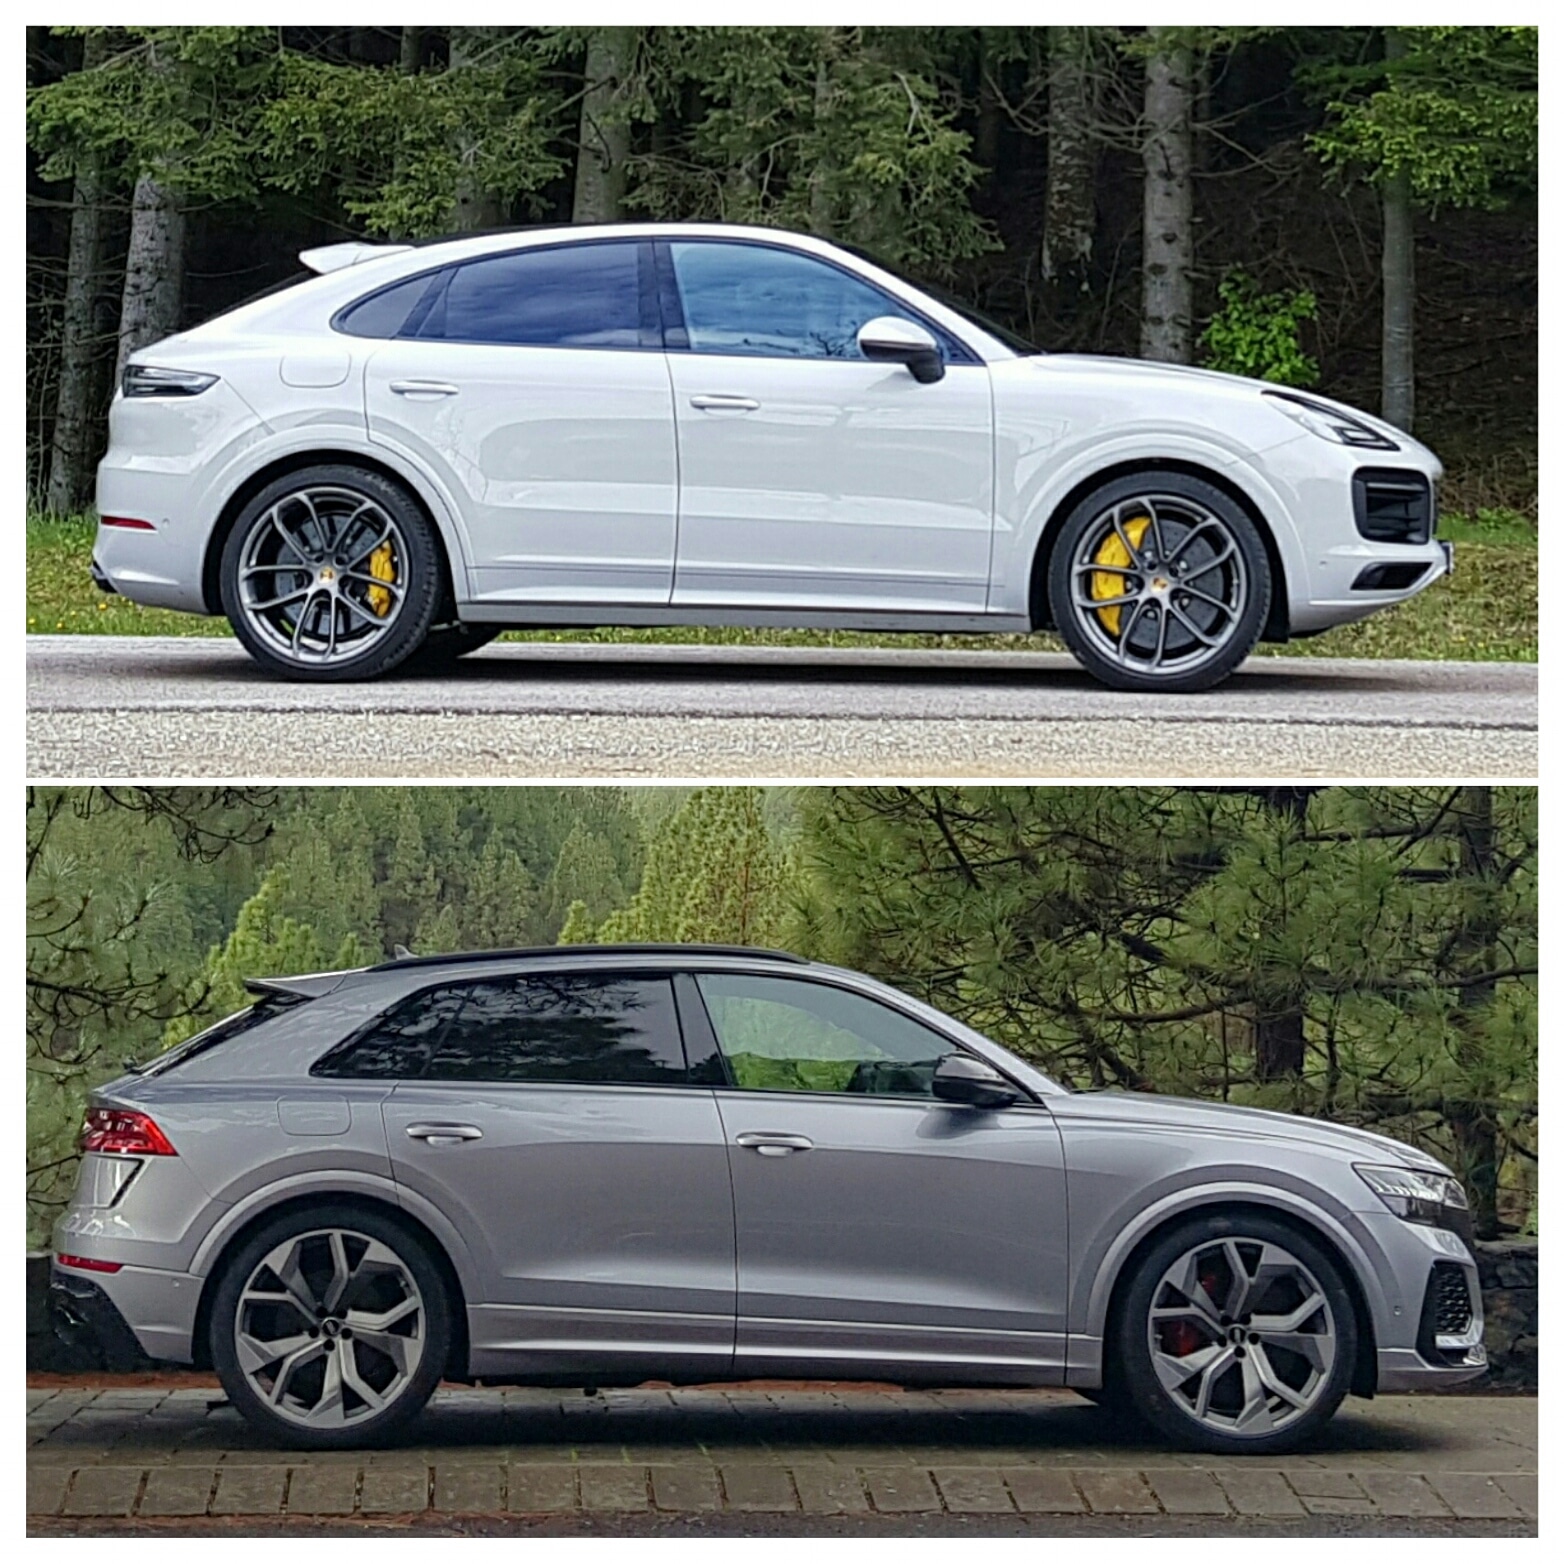 Here's a handy way to compare the 2: Cayenne Coupe is on top, RS Q8 below